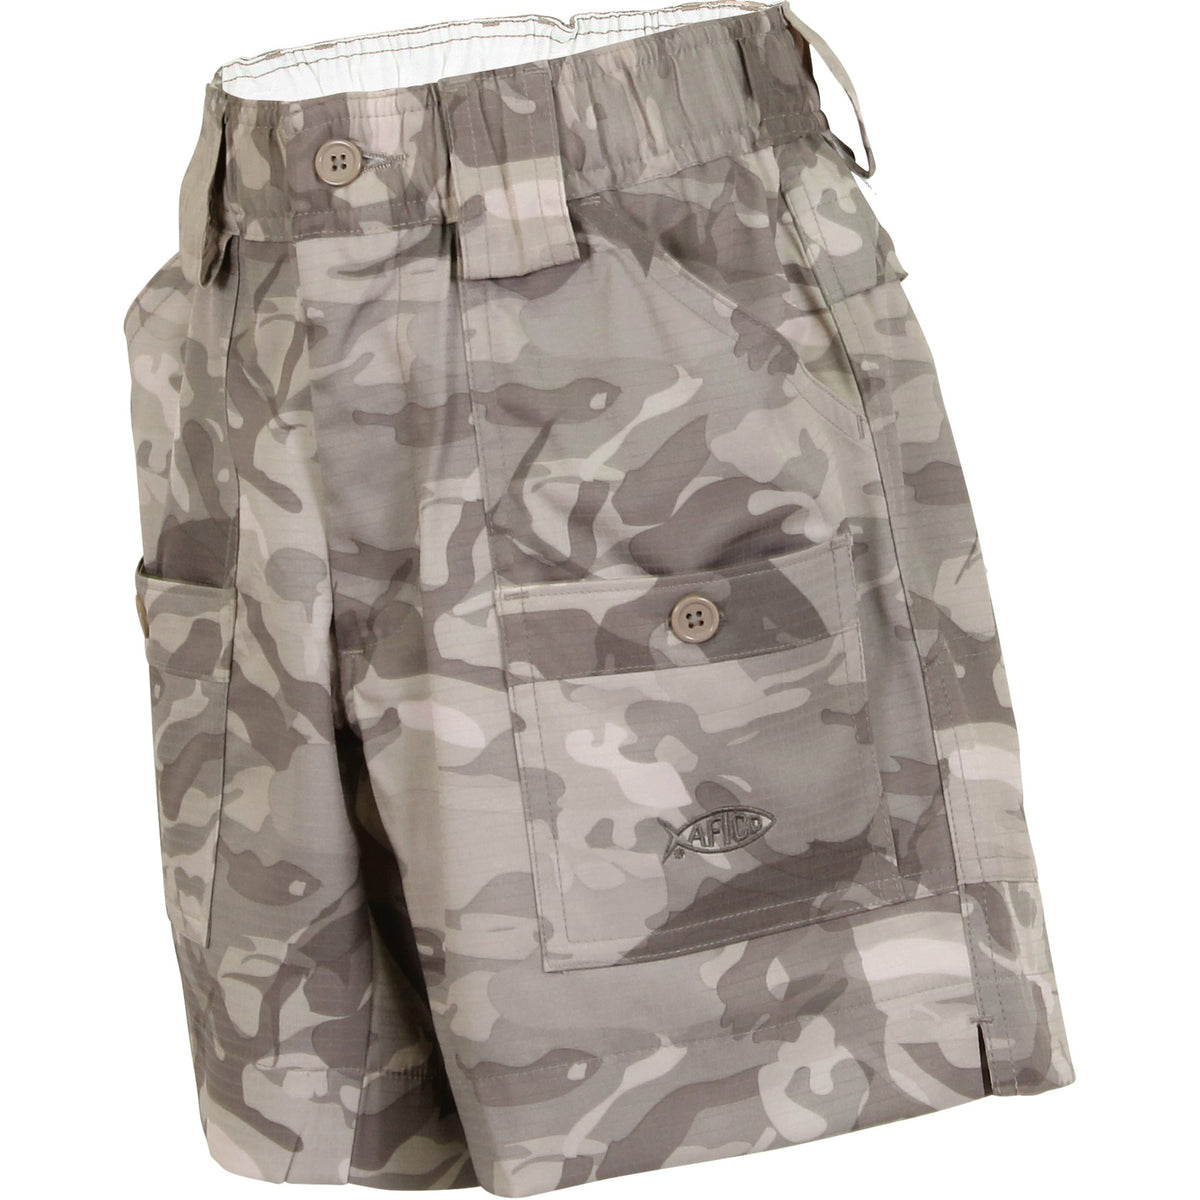 AFTCO Camouflage Shorts for Men for sale